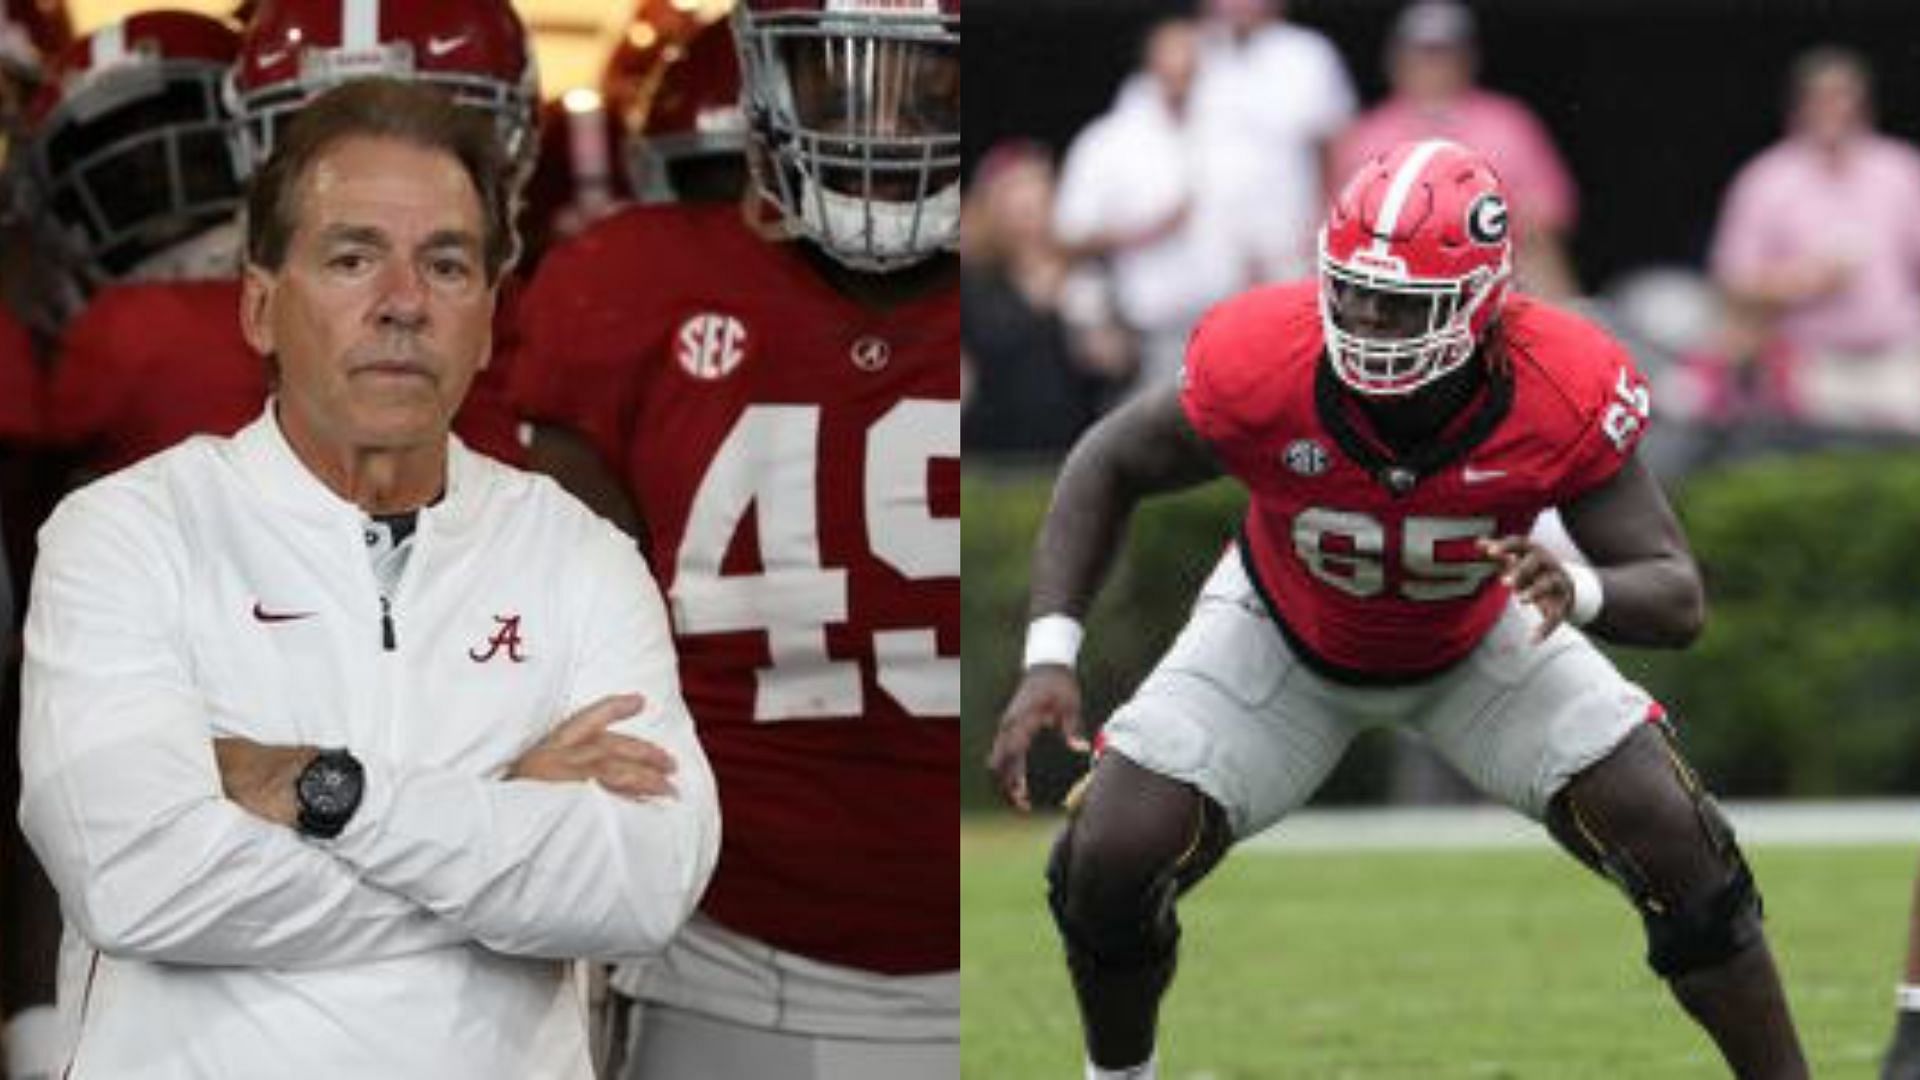 Nick Saban did not hold back his criticism for Amarius Mims